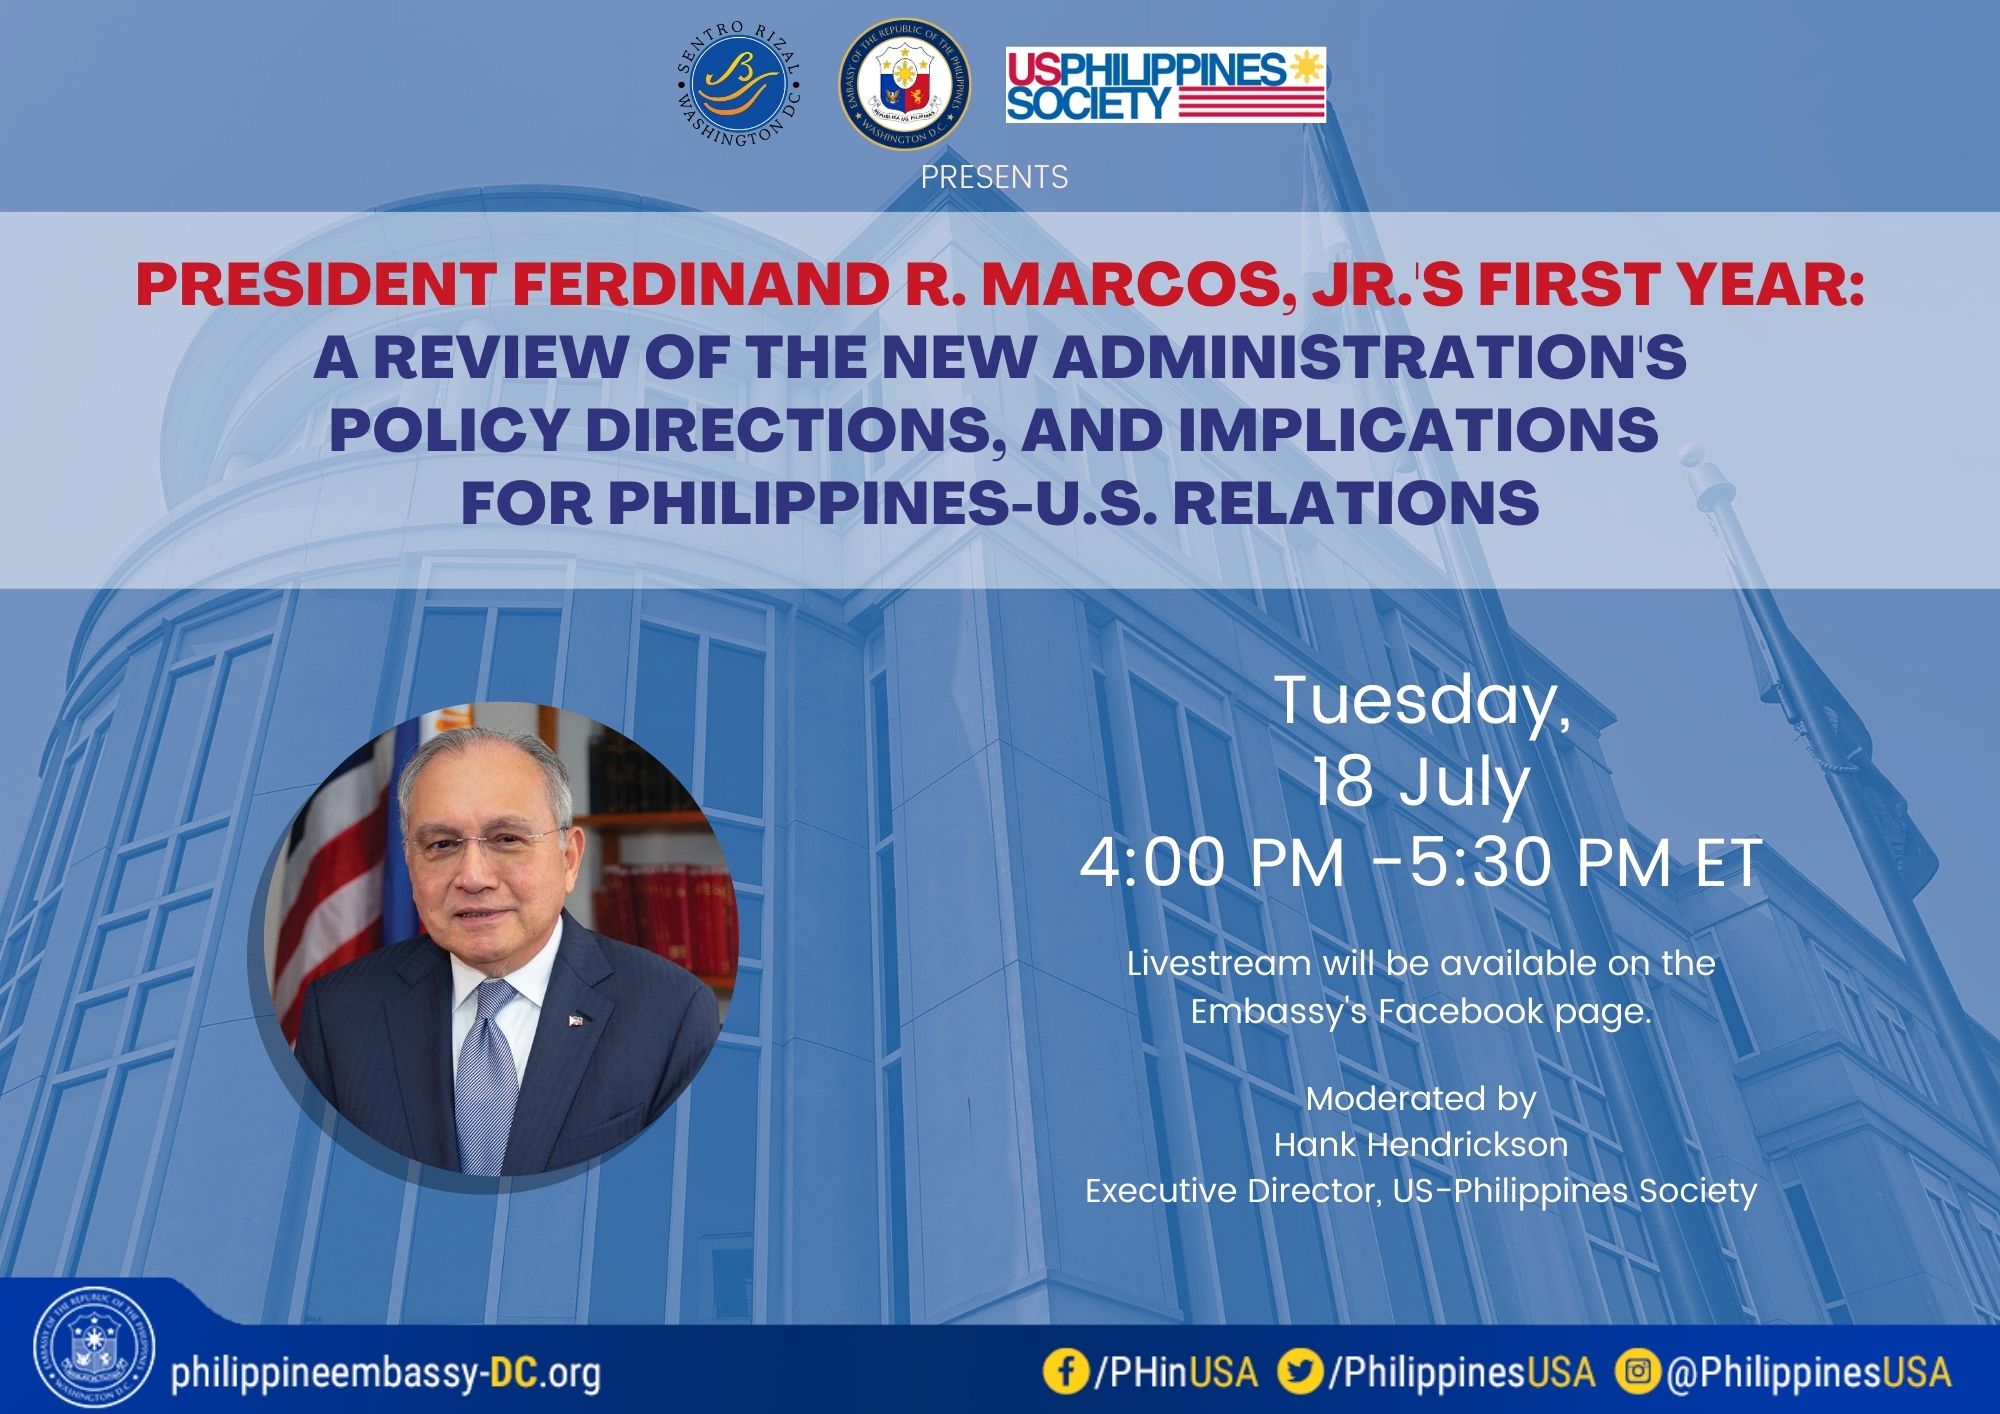 PRESIDENT FERDINAND R. MARCOS, JR.’S FIRST YEAR: A REVIEW OF THE NEW ADMINISTRATION’S POLICY DIRECTIONS, AND IMPLICATIONS FOR PHILIPPINES-U.S. RELATIONS